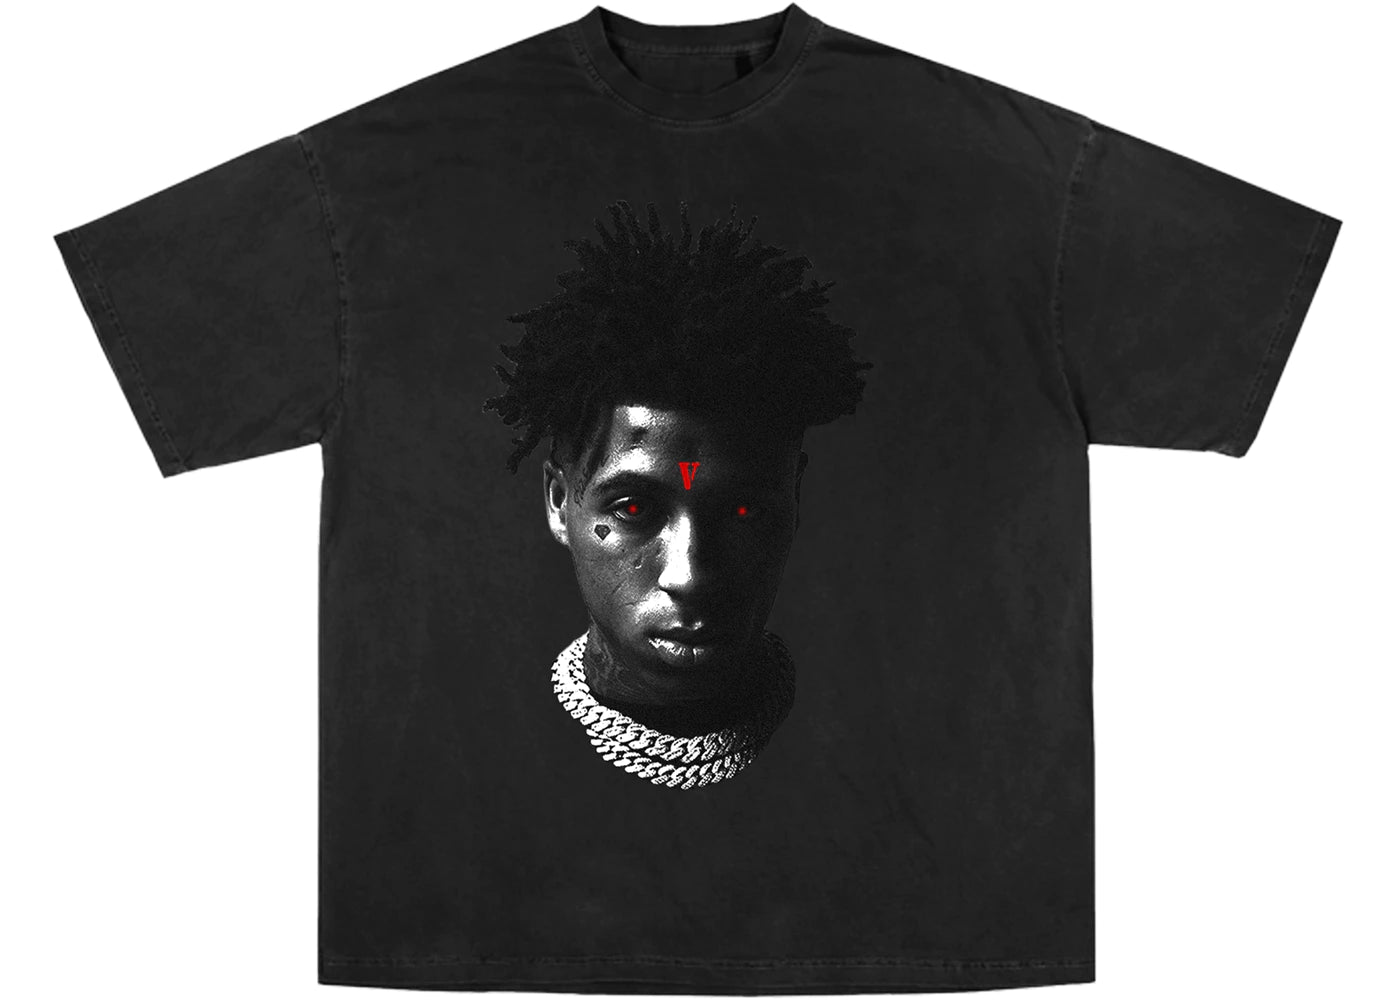 YoungBoy NBA x Vlone Reaper's Child Tee black - Centrall Online